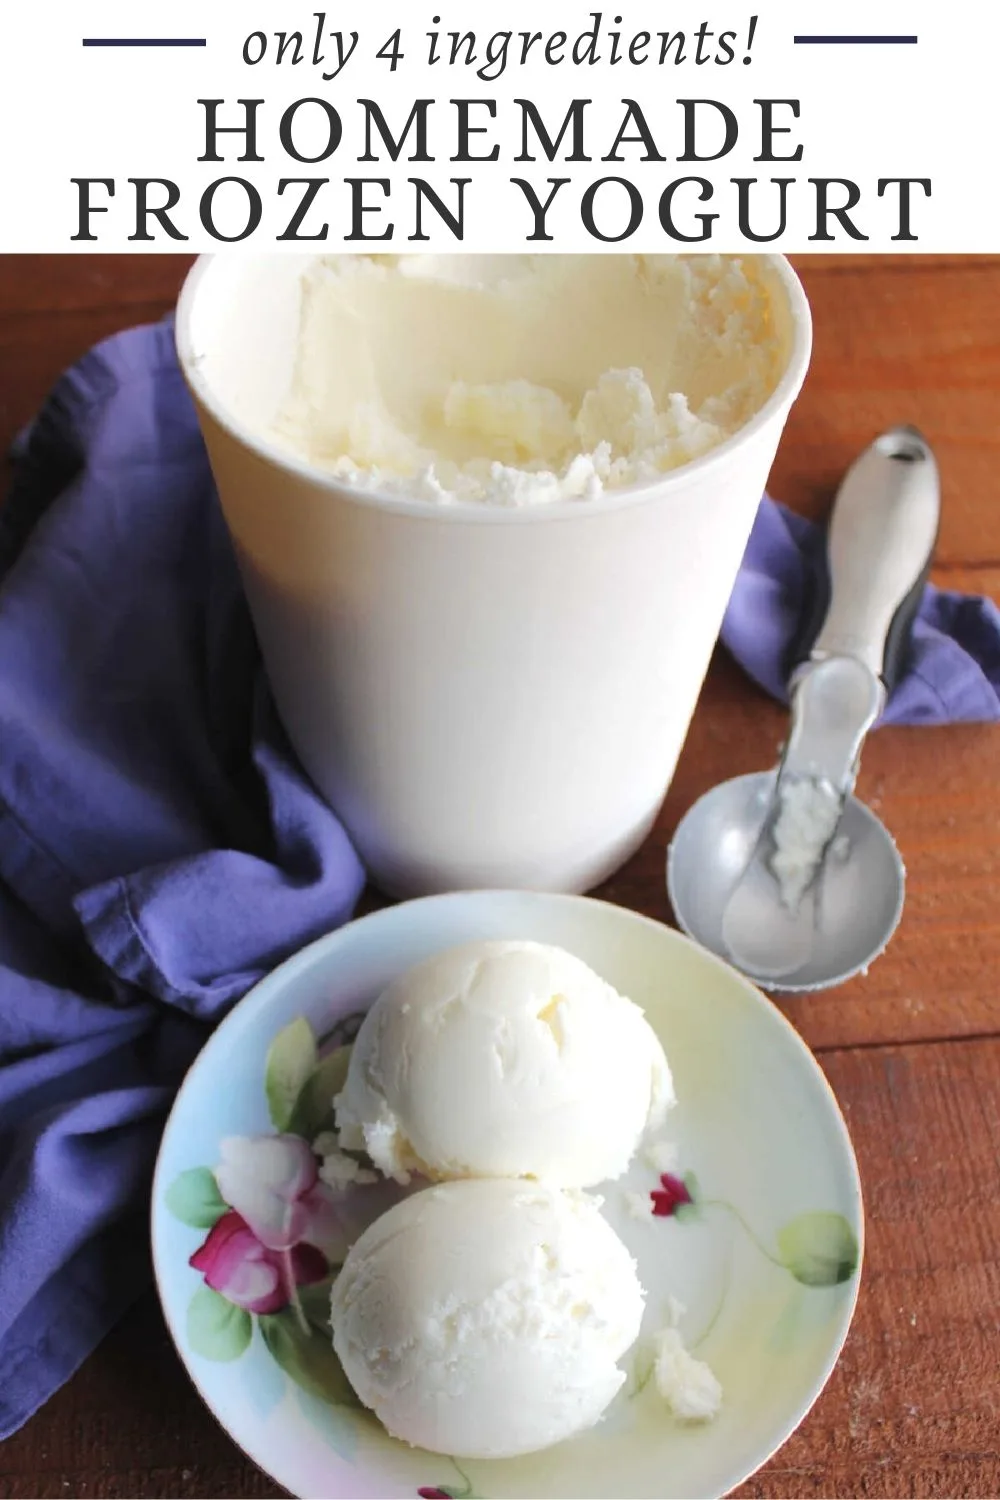 Make homemade frozen yogurt with just 4 simple ingredients. This easy recipe can easily be customized to make all sorts of different flavor combinations.